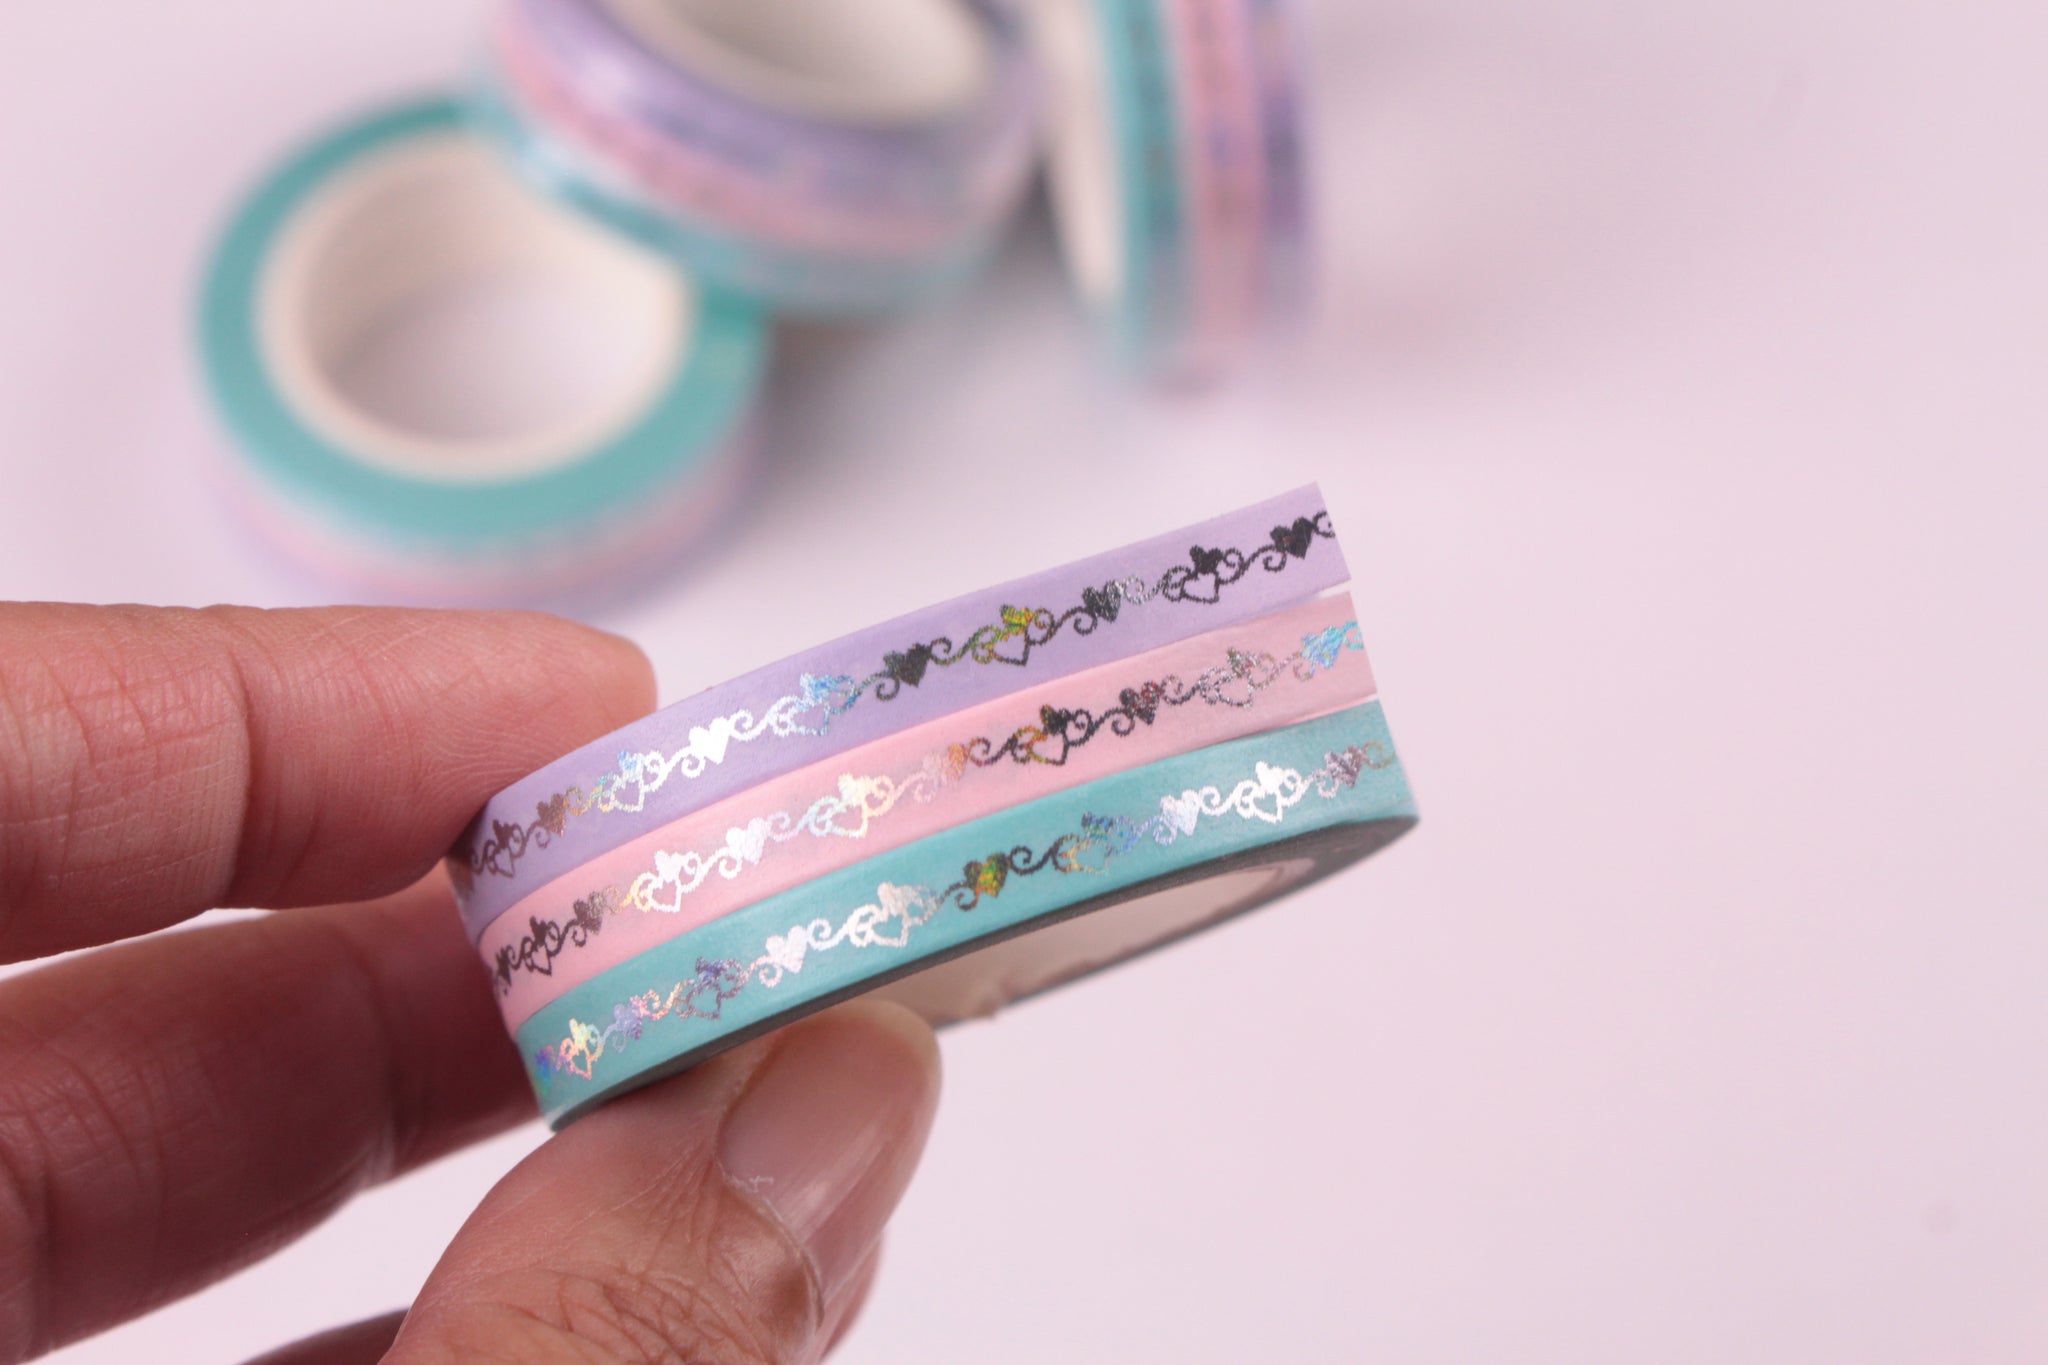 Foil Hearts on Pastel Washi Tape